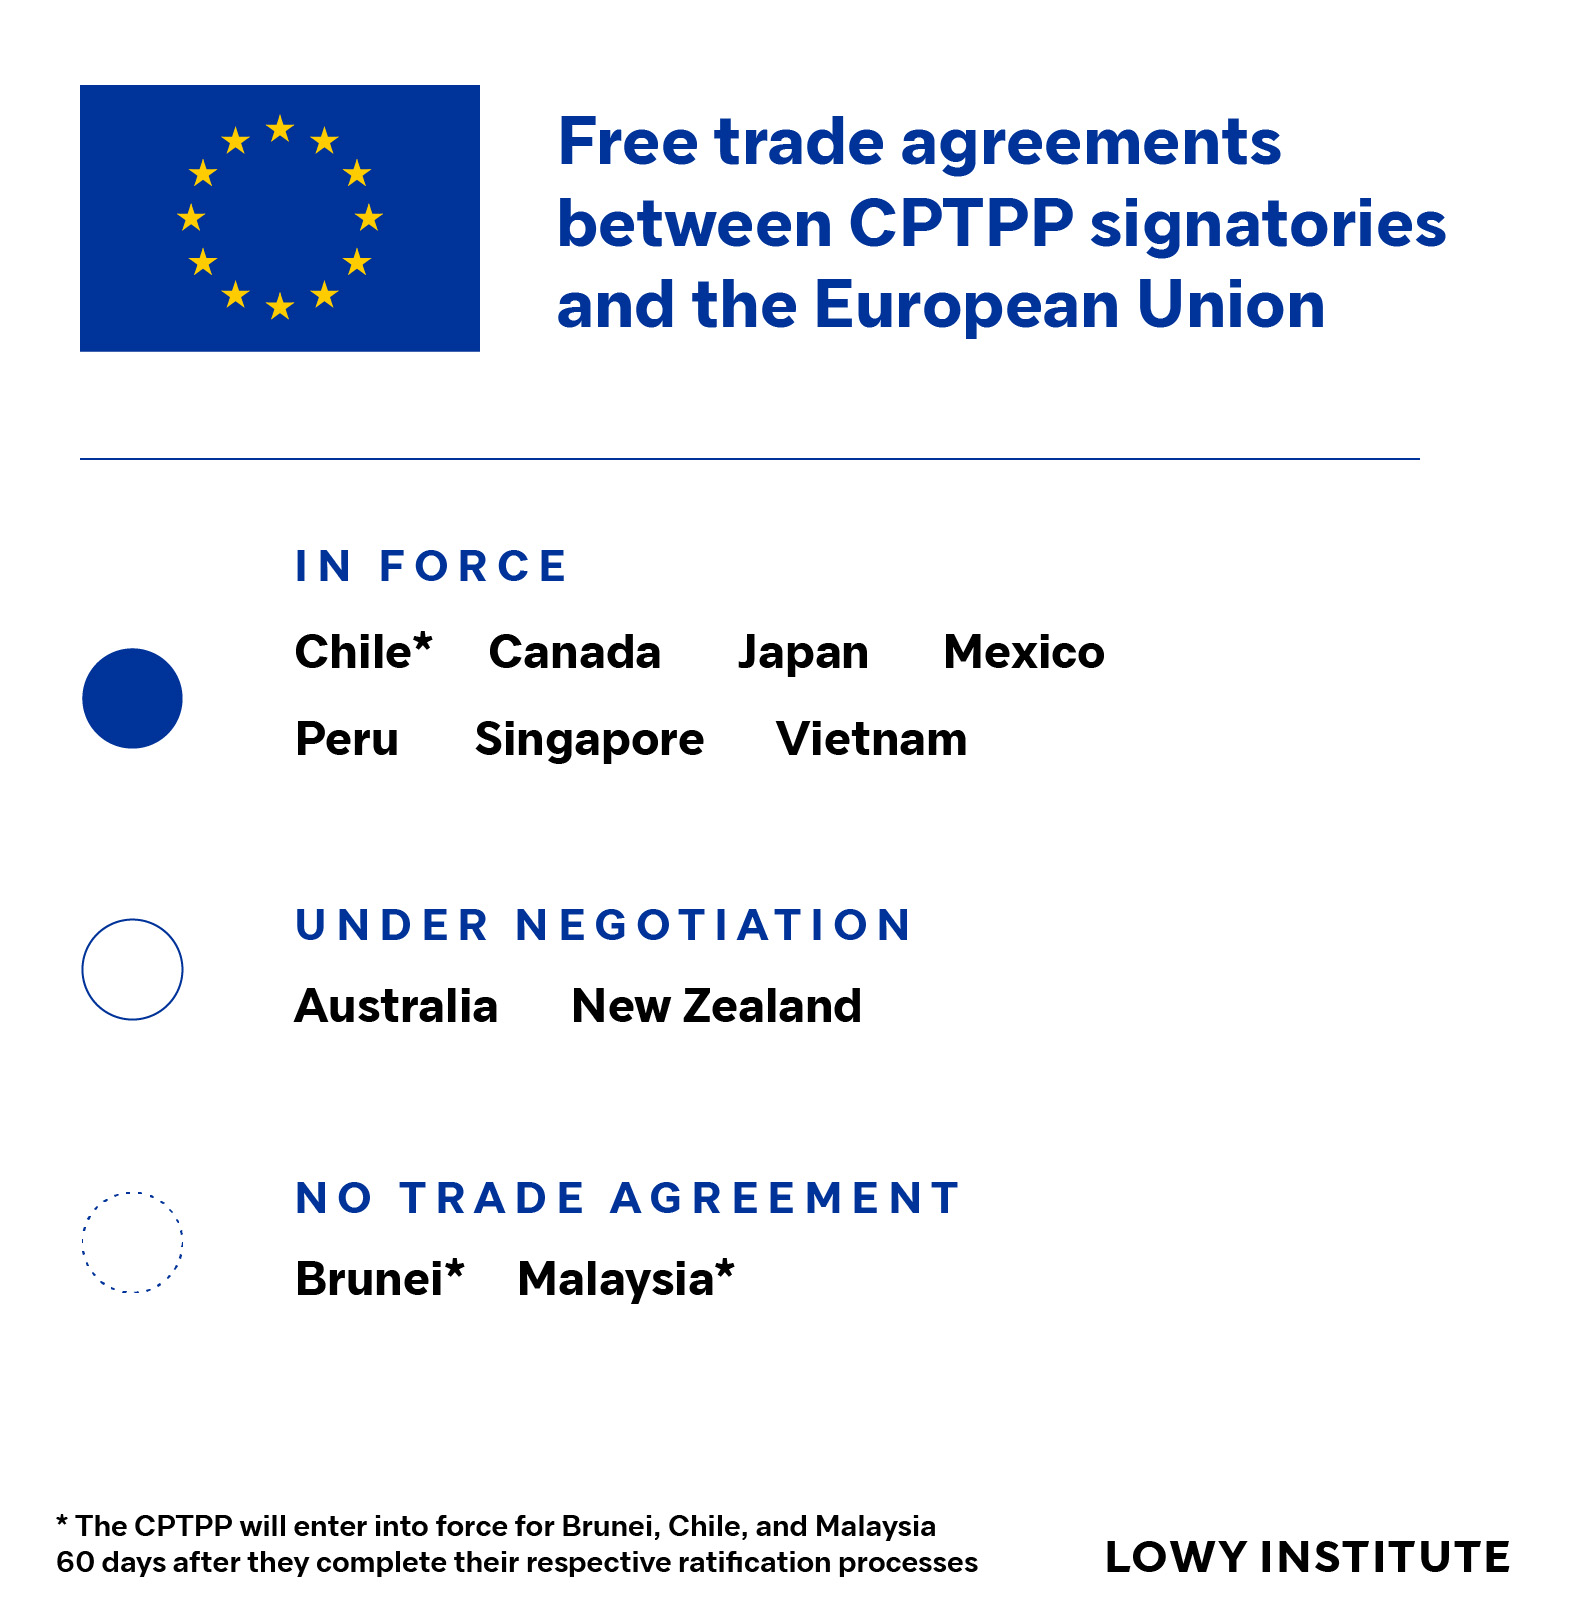 Free trade agreements between CPTPP signatories and the EU